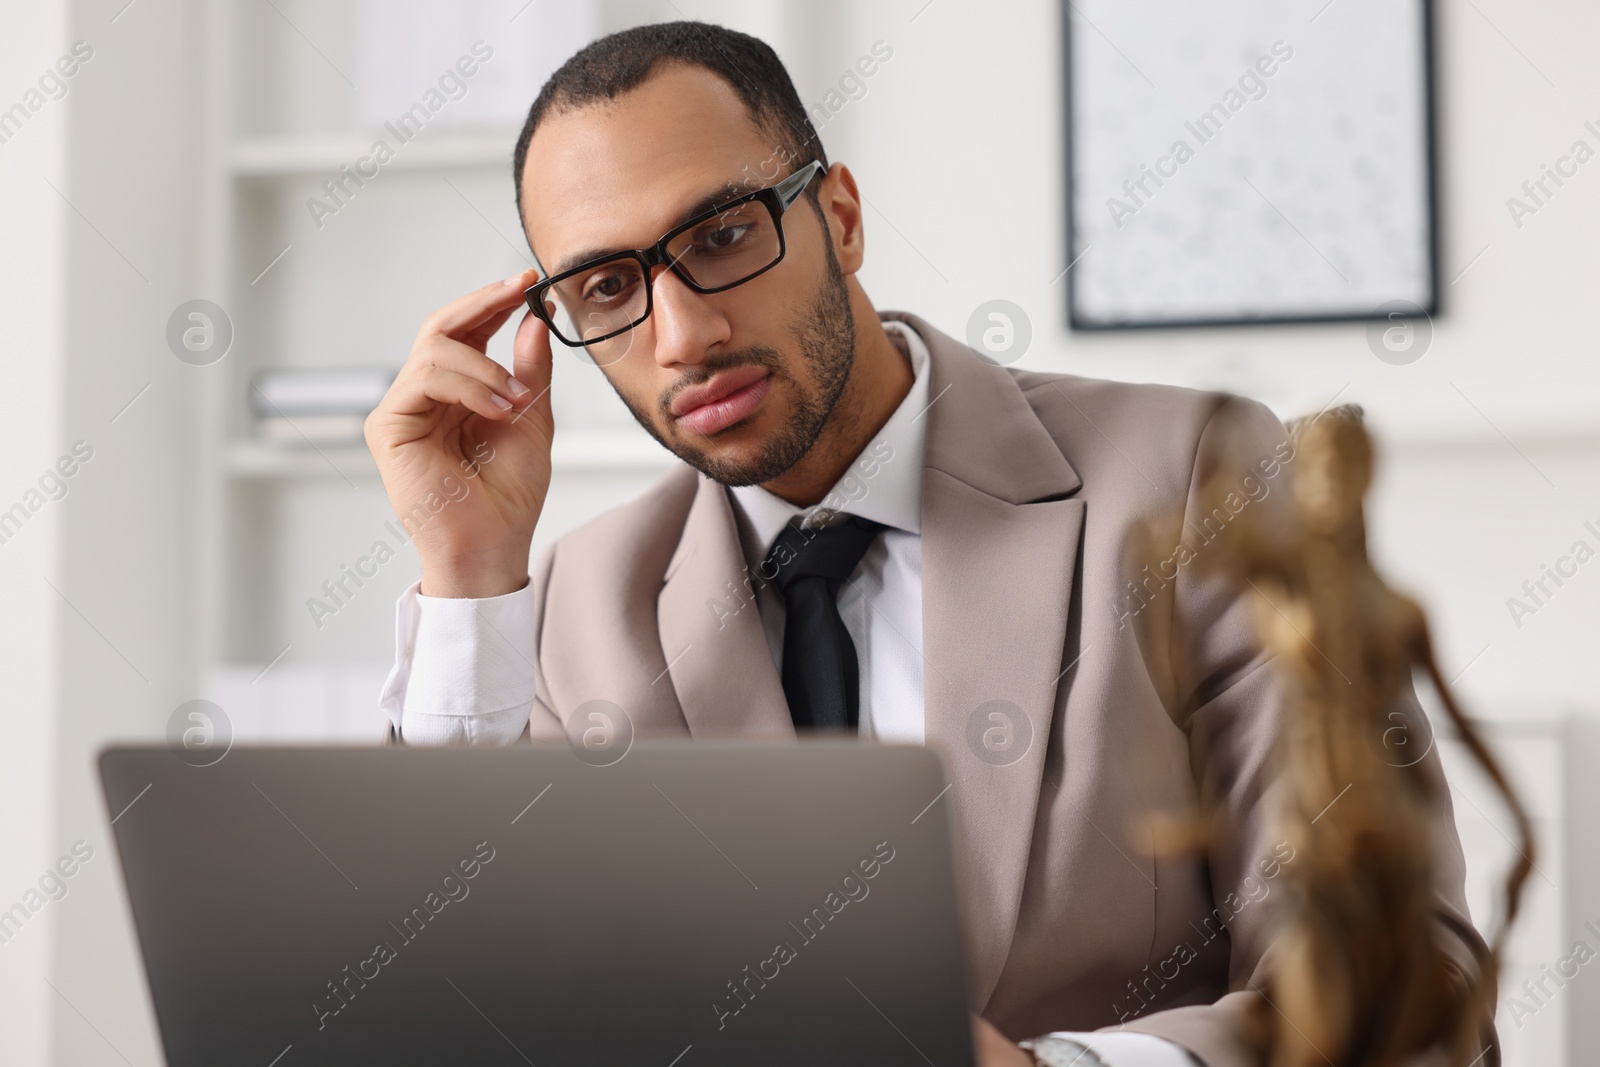 Photo of Serious lawyer working with laptop at table in office